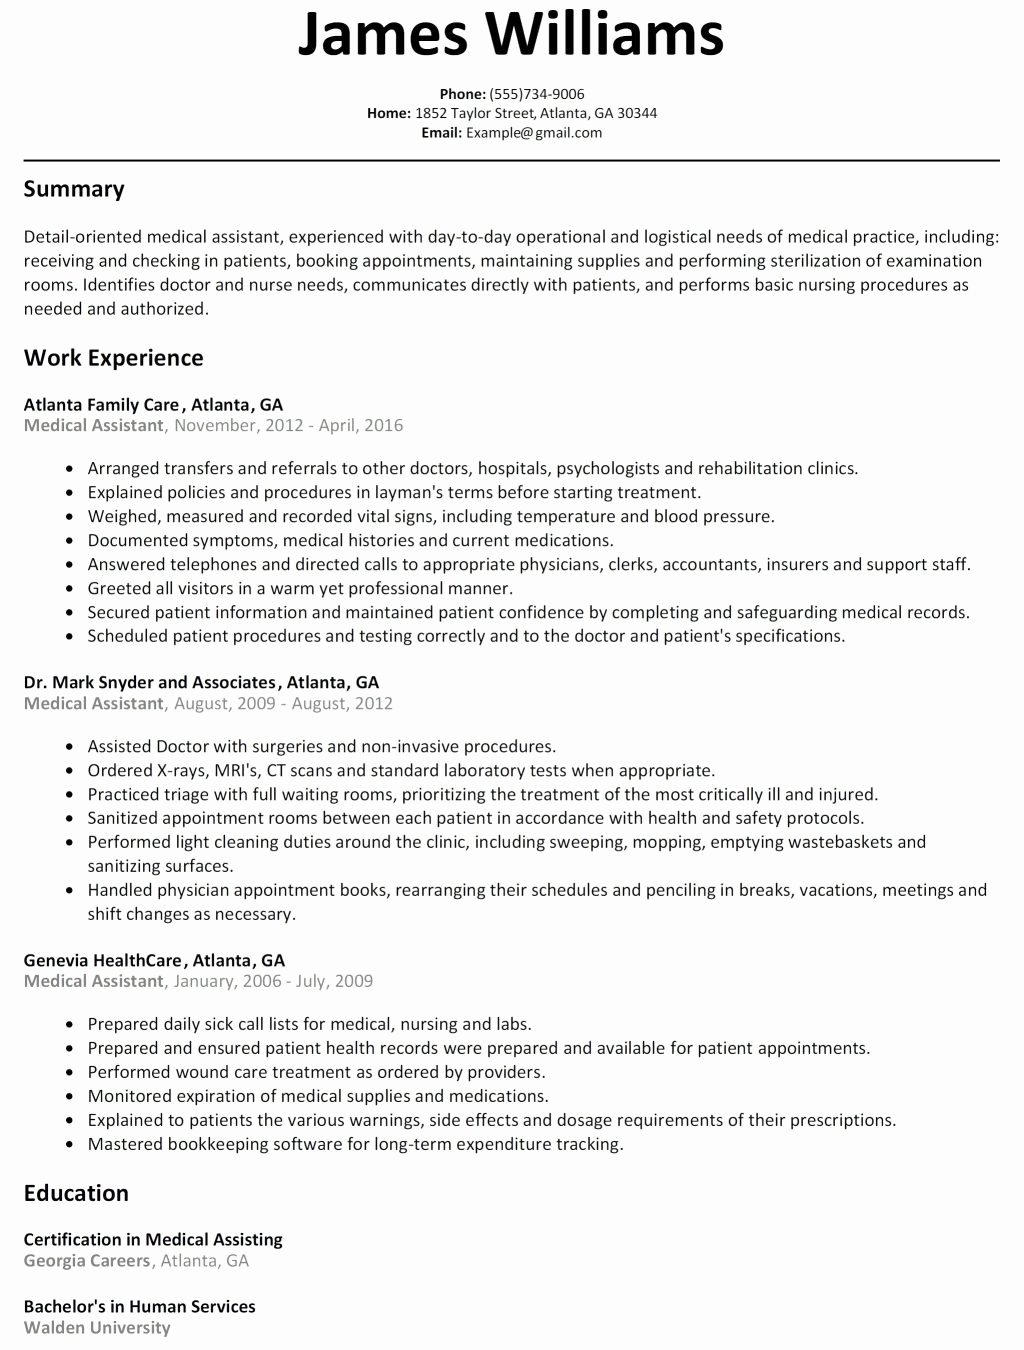 College Admissions Resume Templates Lovely Sample College Admission Resume Tag 59 College Admission